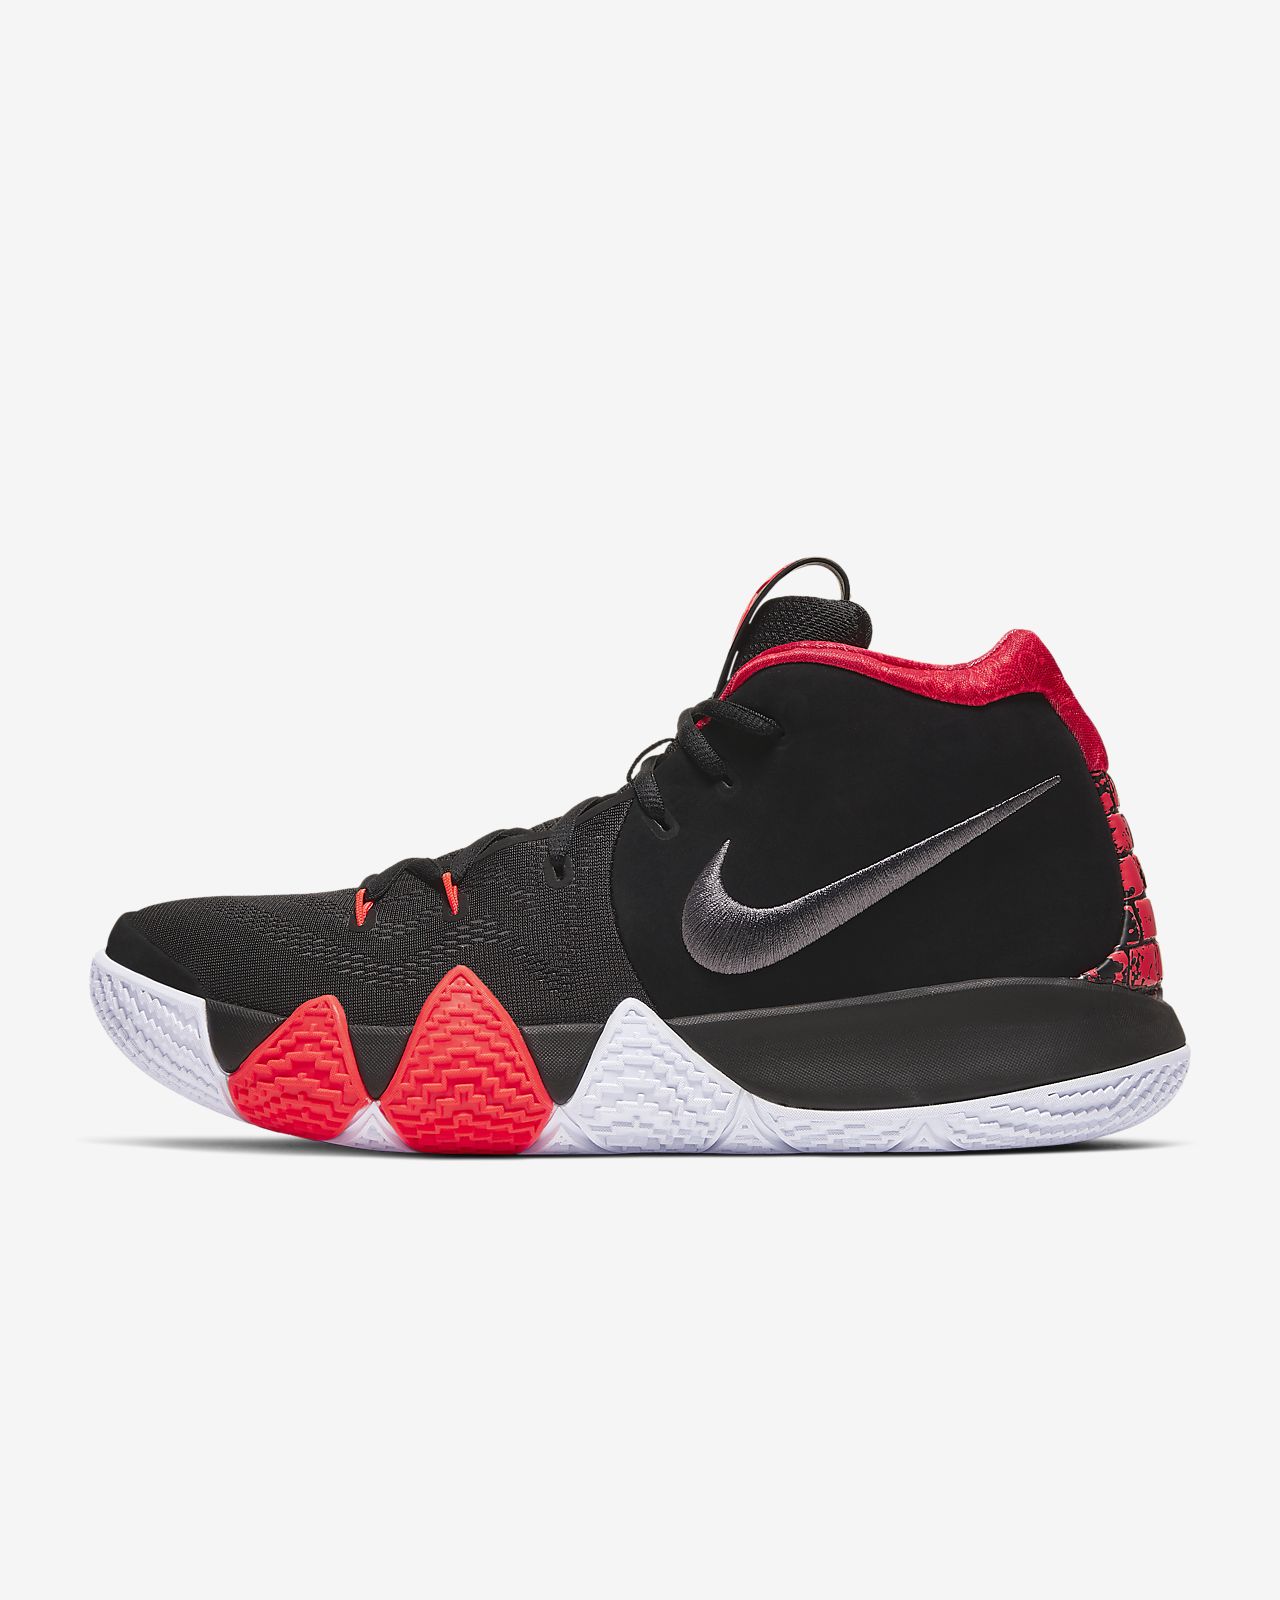 kyrie 4 basketball shoes